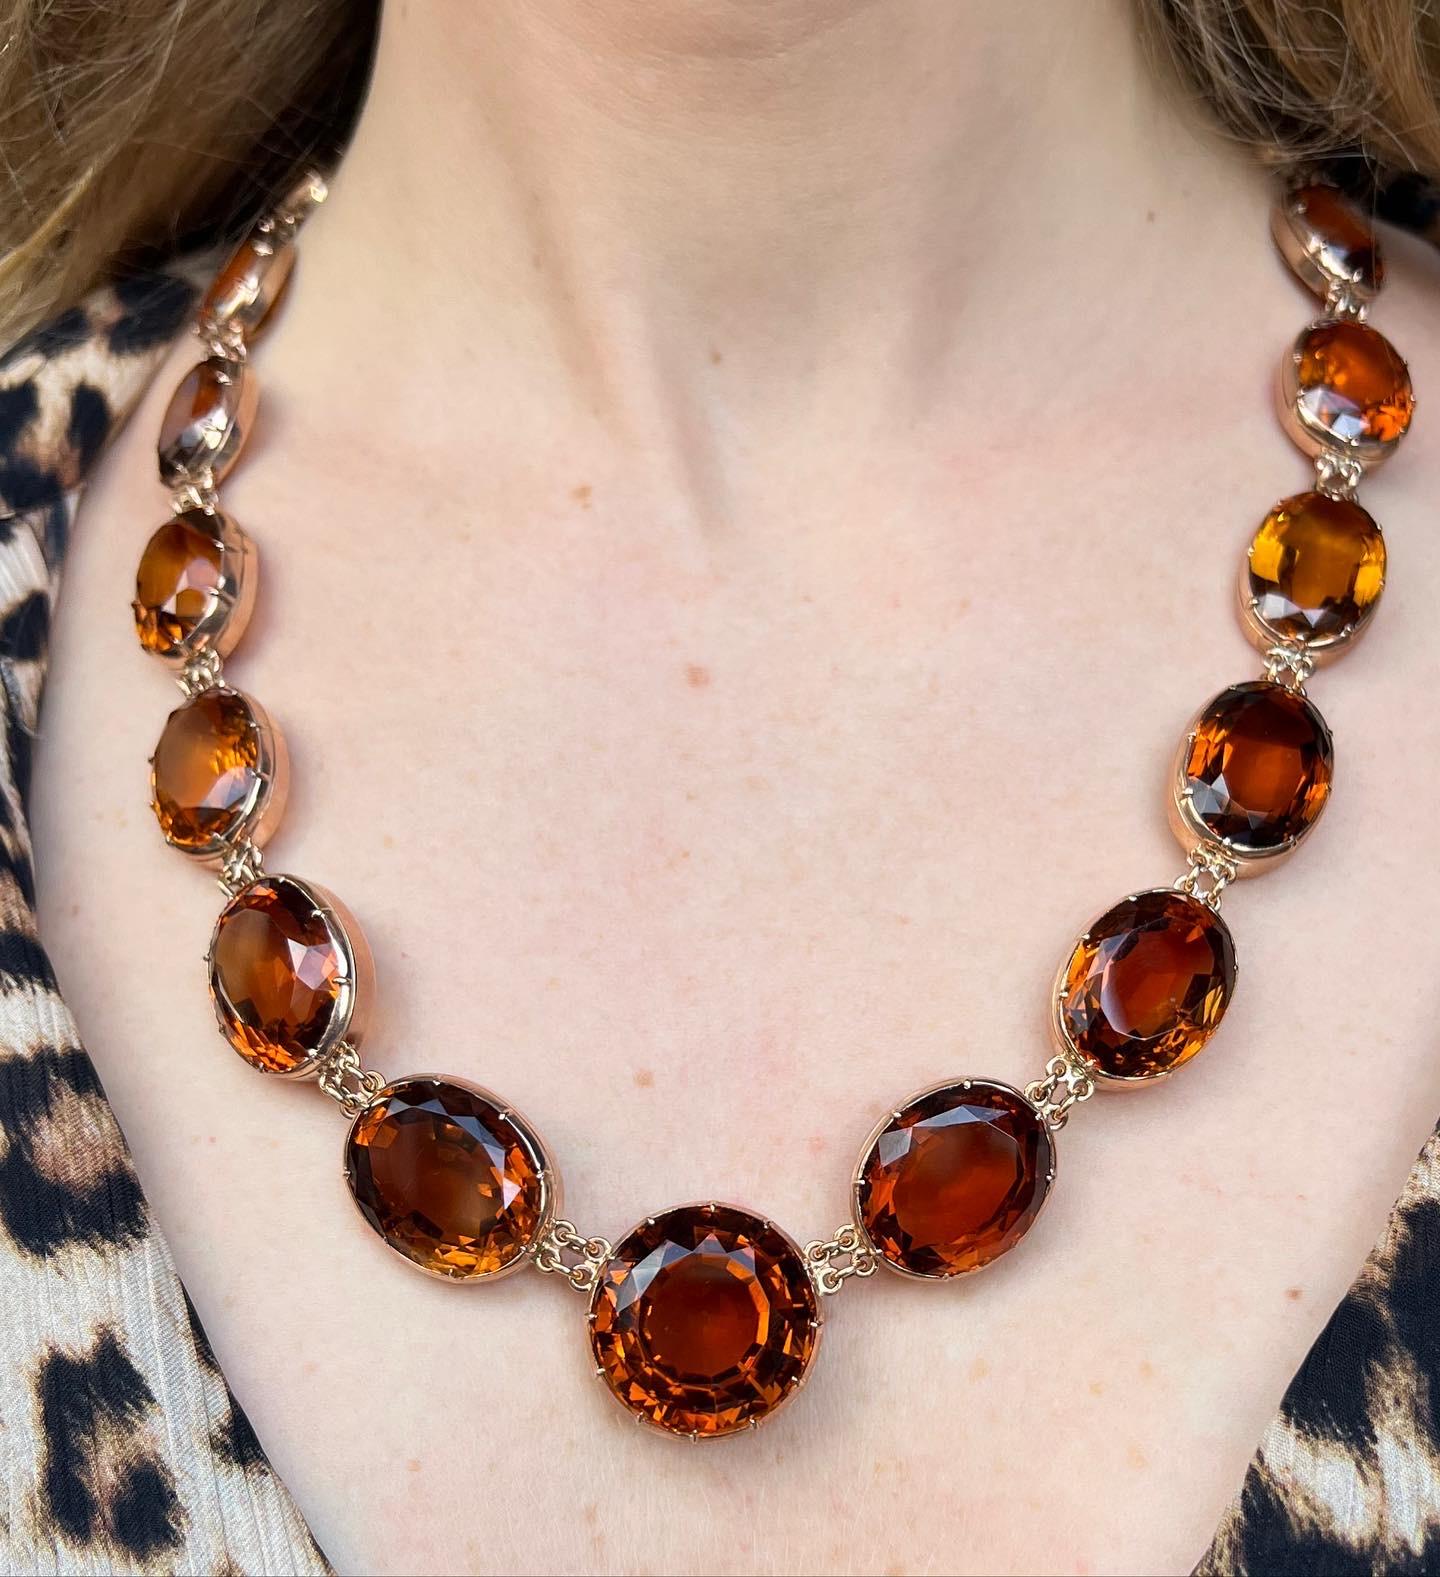 Rare XIX th century (19th) necklace in silver and gold set with amazing color oval citrines. The largest citrine is a round cut, set in the center of the necklace. 
Total citrines carat weight : 300 carats approximately.
The strong color of the